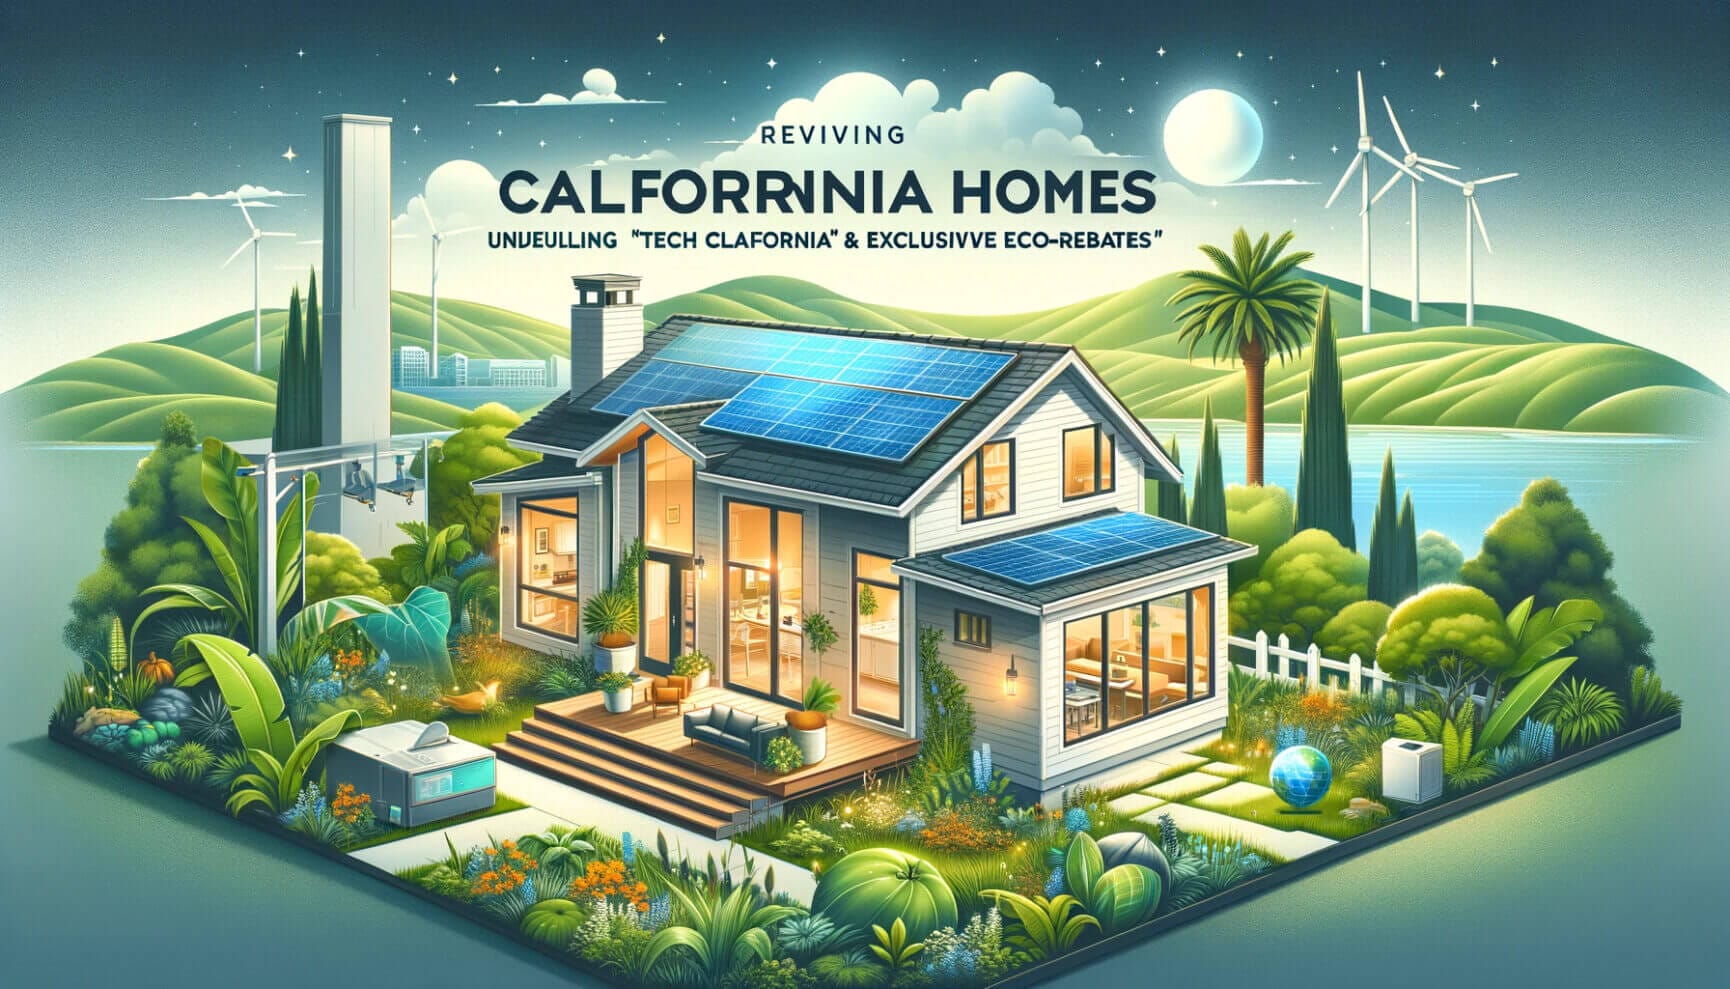 California homes with solar panels and wind turbines.